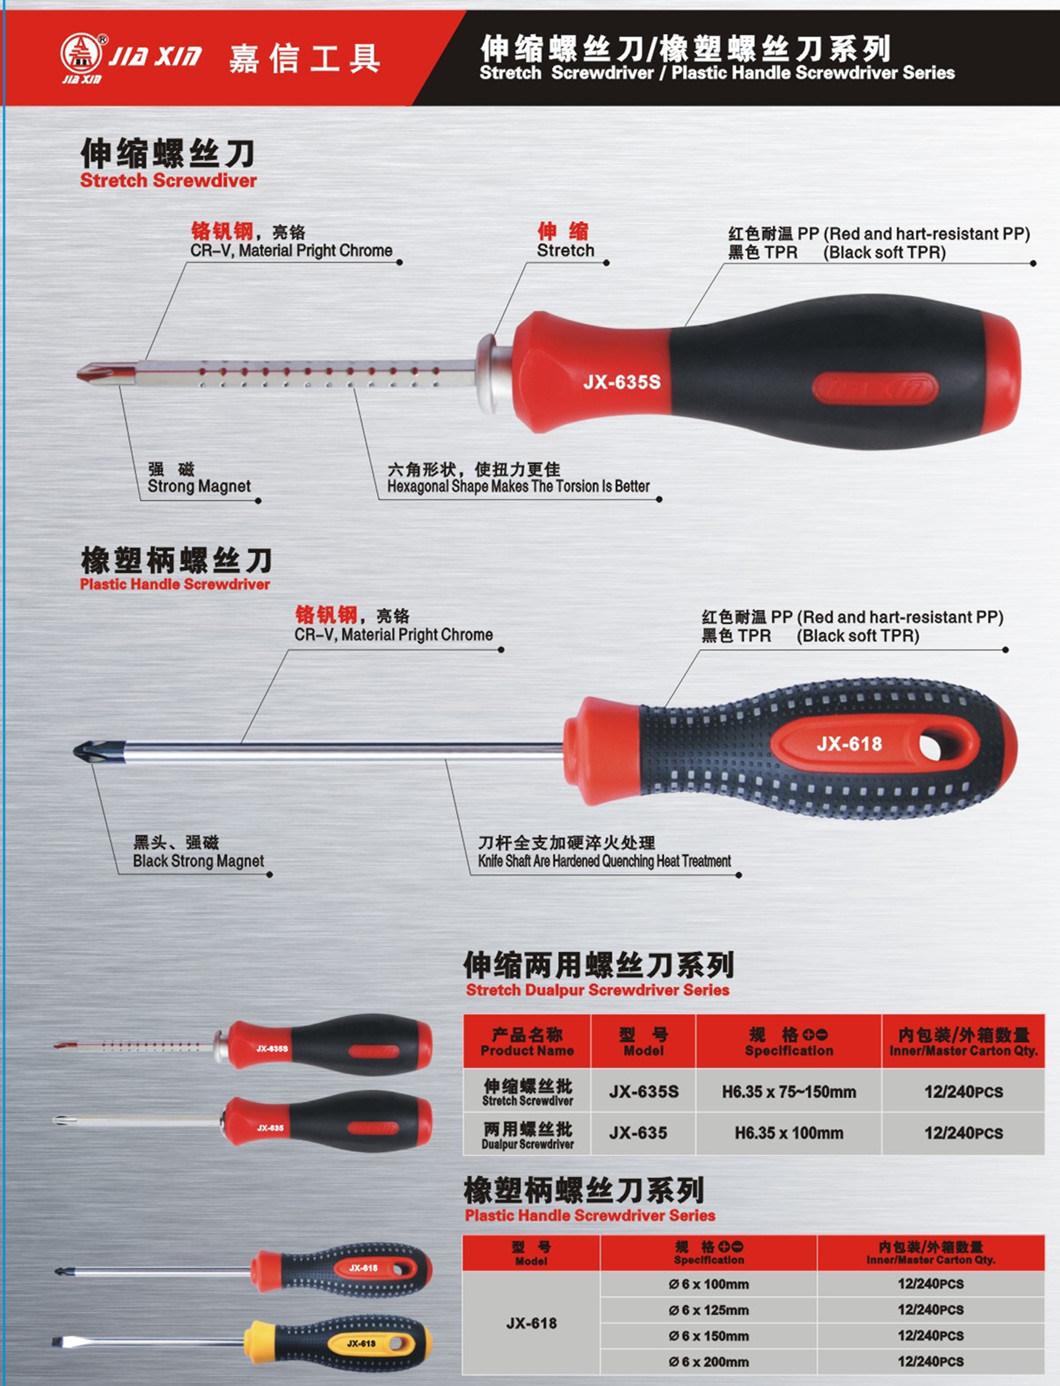 Adjustable Length of Two Specifications of One Screwdriver